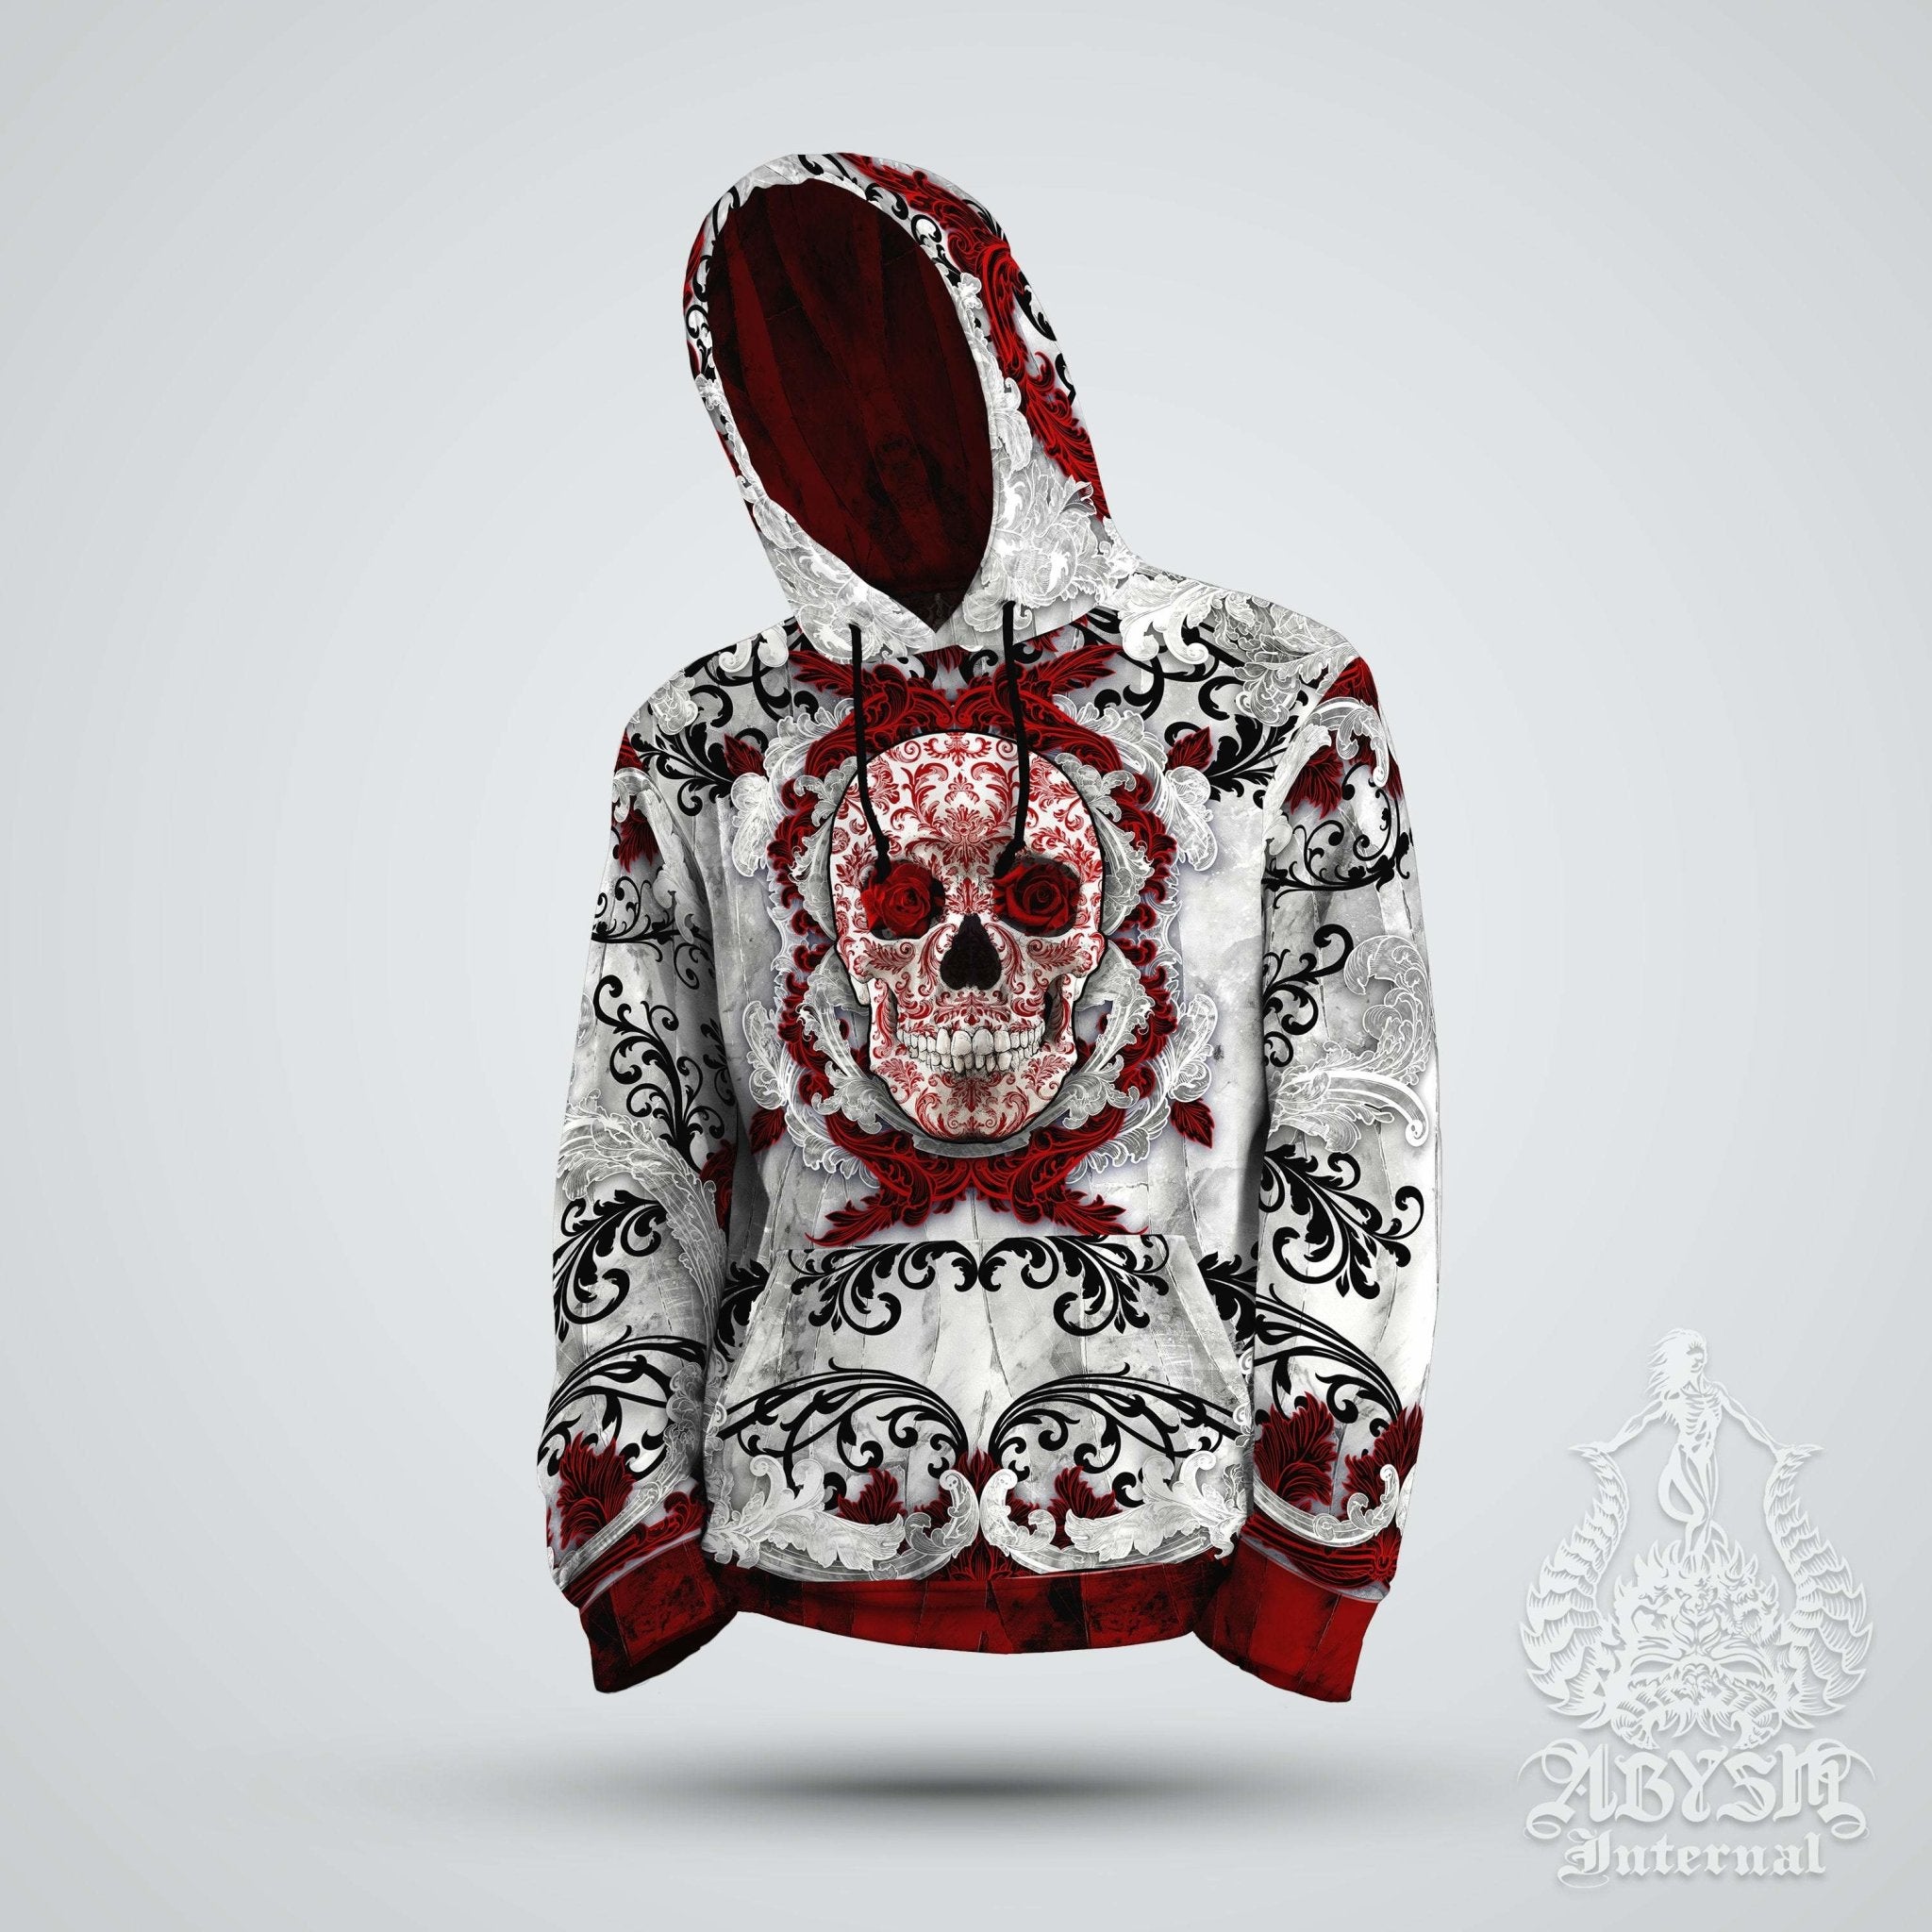 Skull Hoodie, White Goth Streetwear, Street Outfit, Gothic Sweater, Alternative Clothing, Unisex - Bloody - Abysm Internal